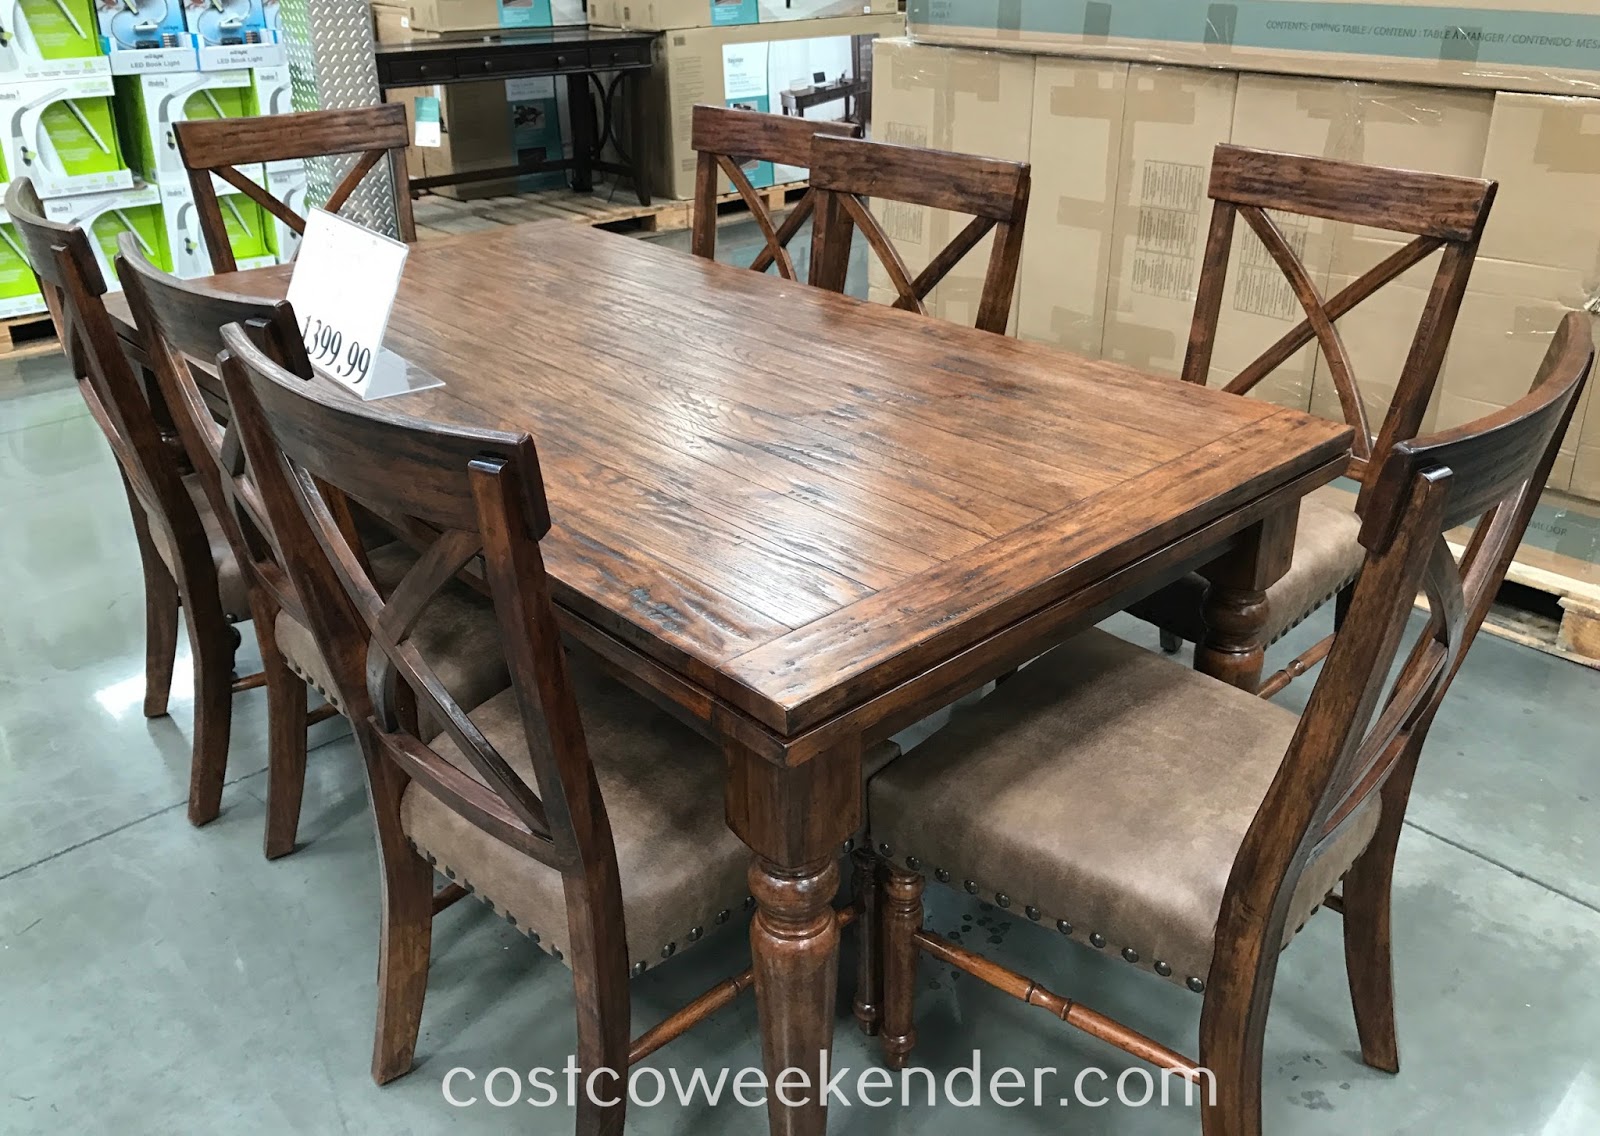 Costco Kitchen Table And Chairs The Table Is Made Of Solid Birch